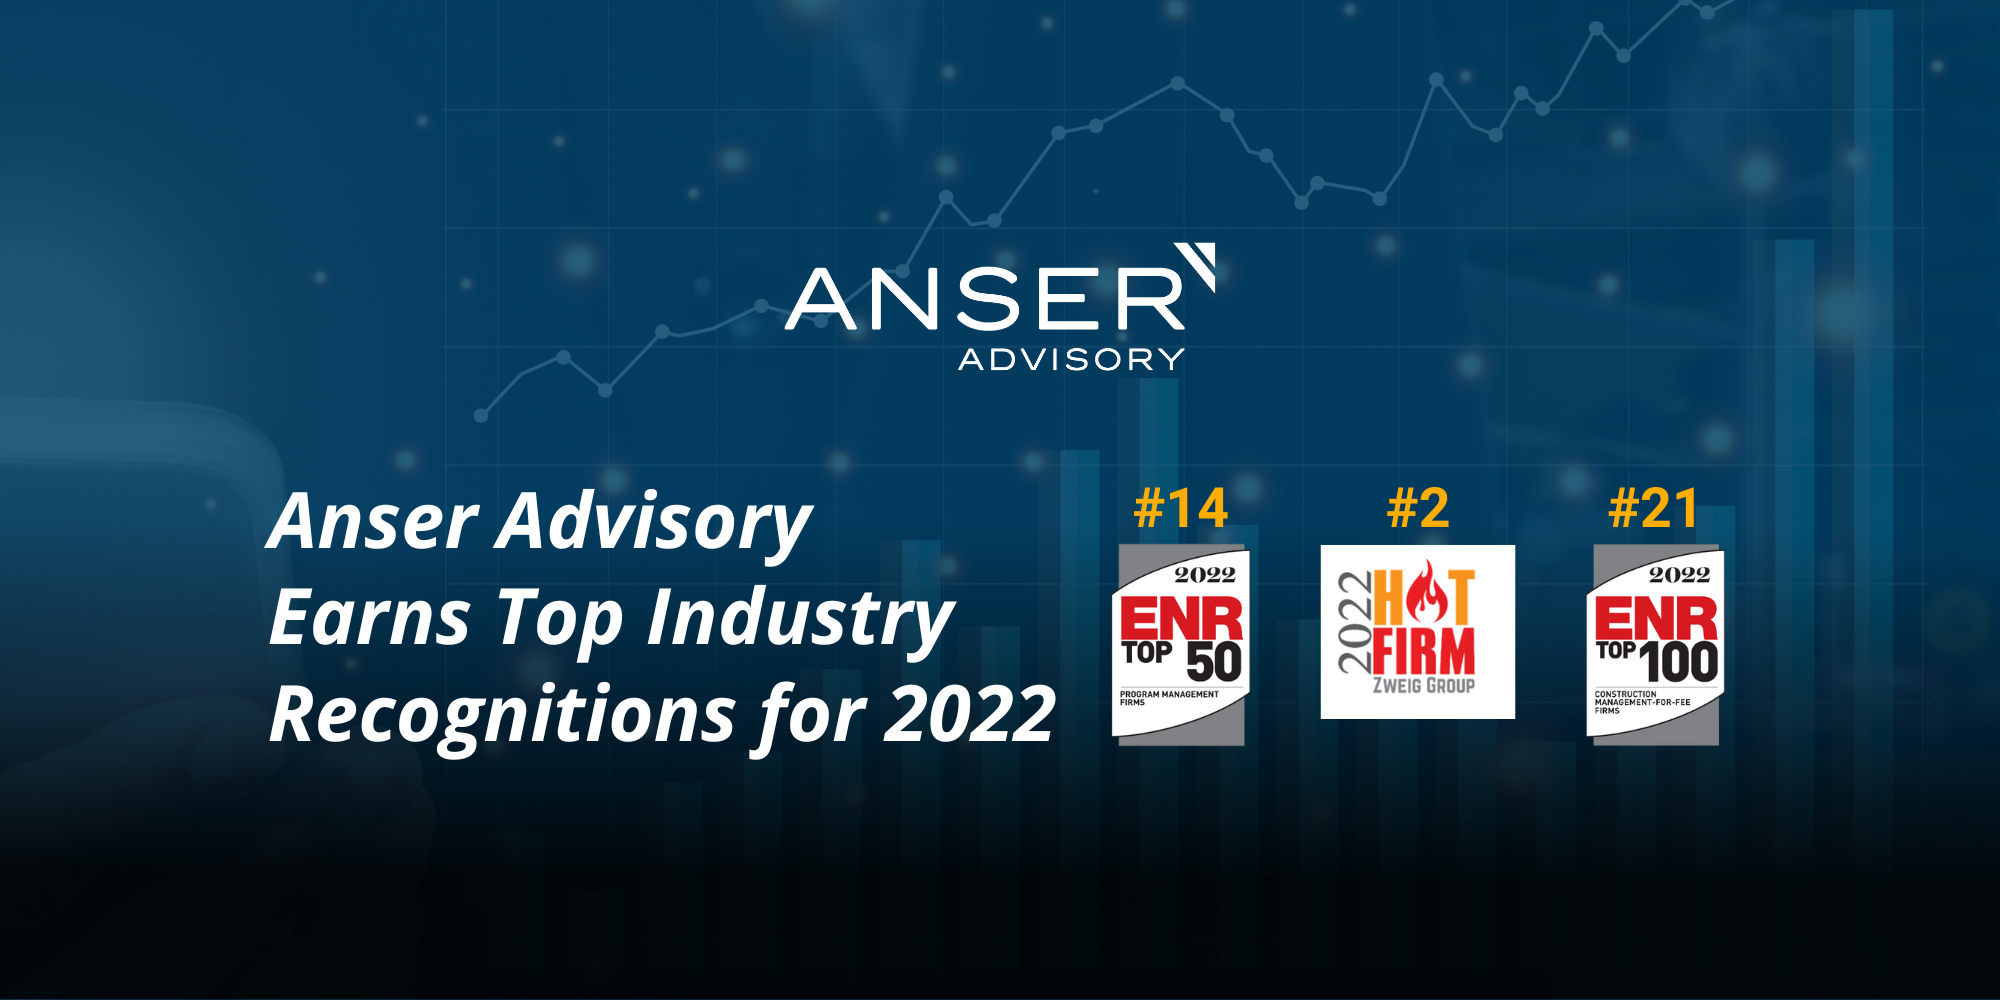 Anser Advisory Earns Top 2022 Industry Recognitions from ENR & Zweig